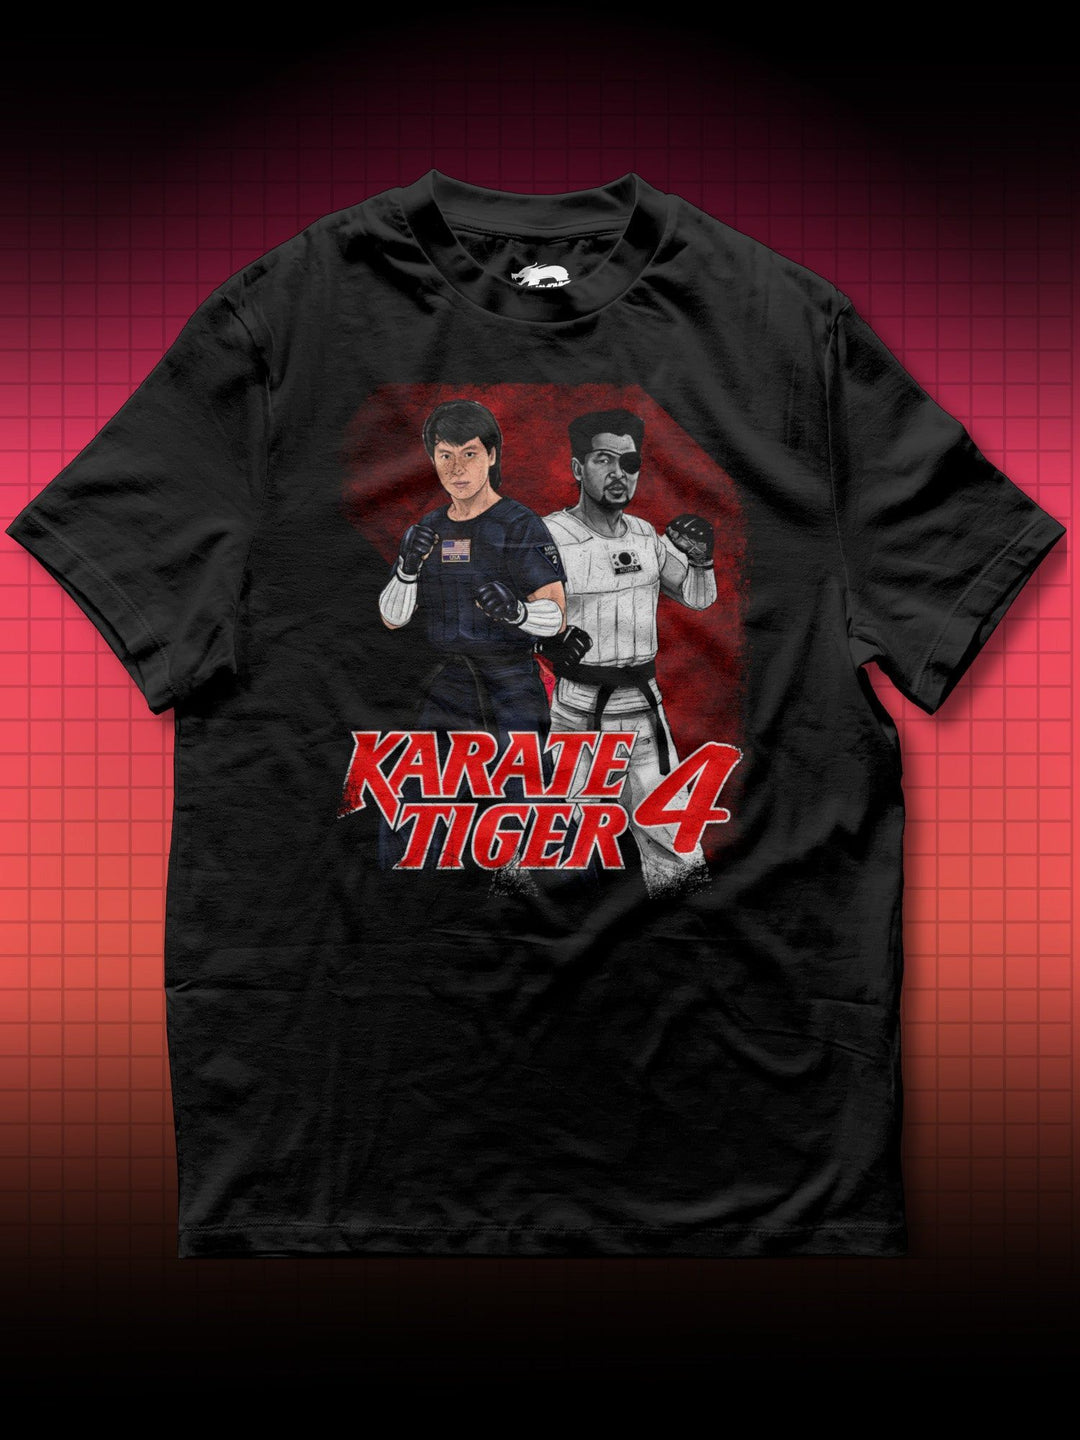 KARATE TIGER 4 - BEST OF THE BEST | ERIC ROBERTS | T-SHIRT - DRAMAMONKS